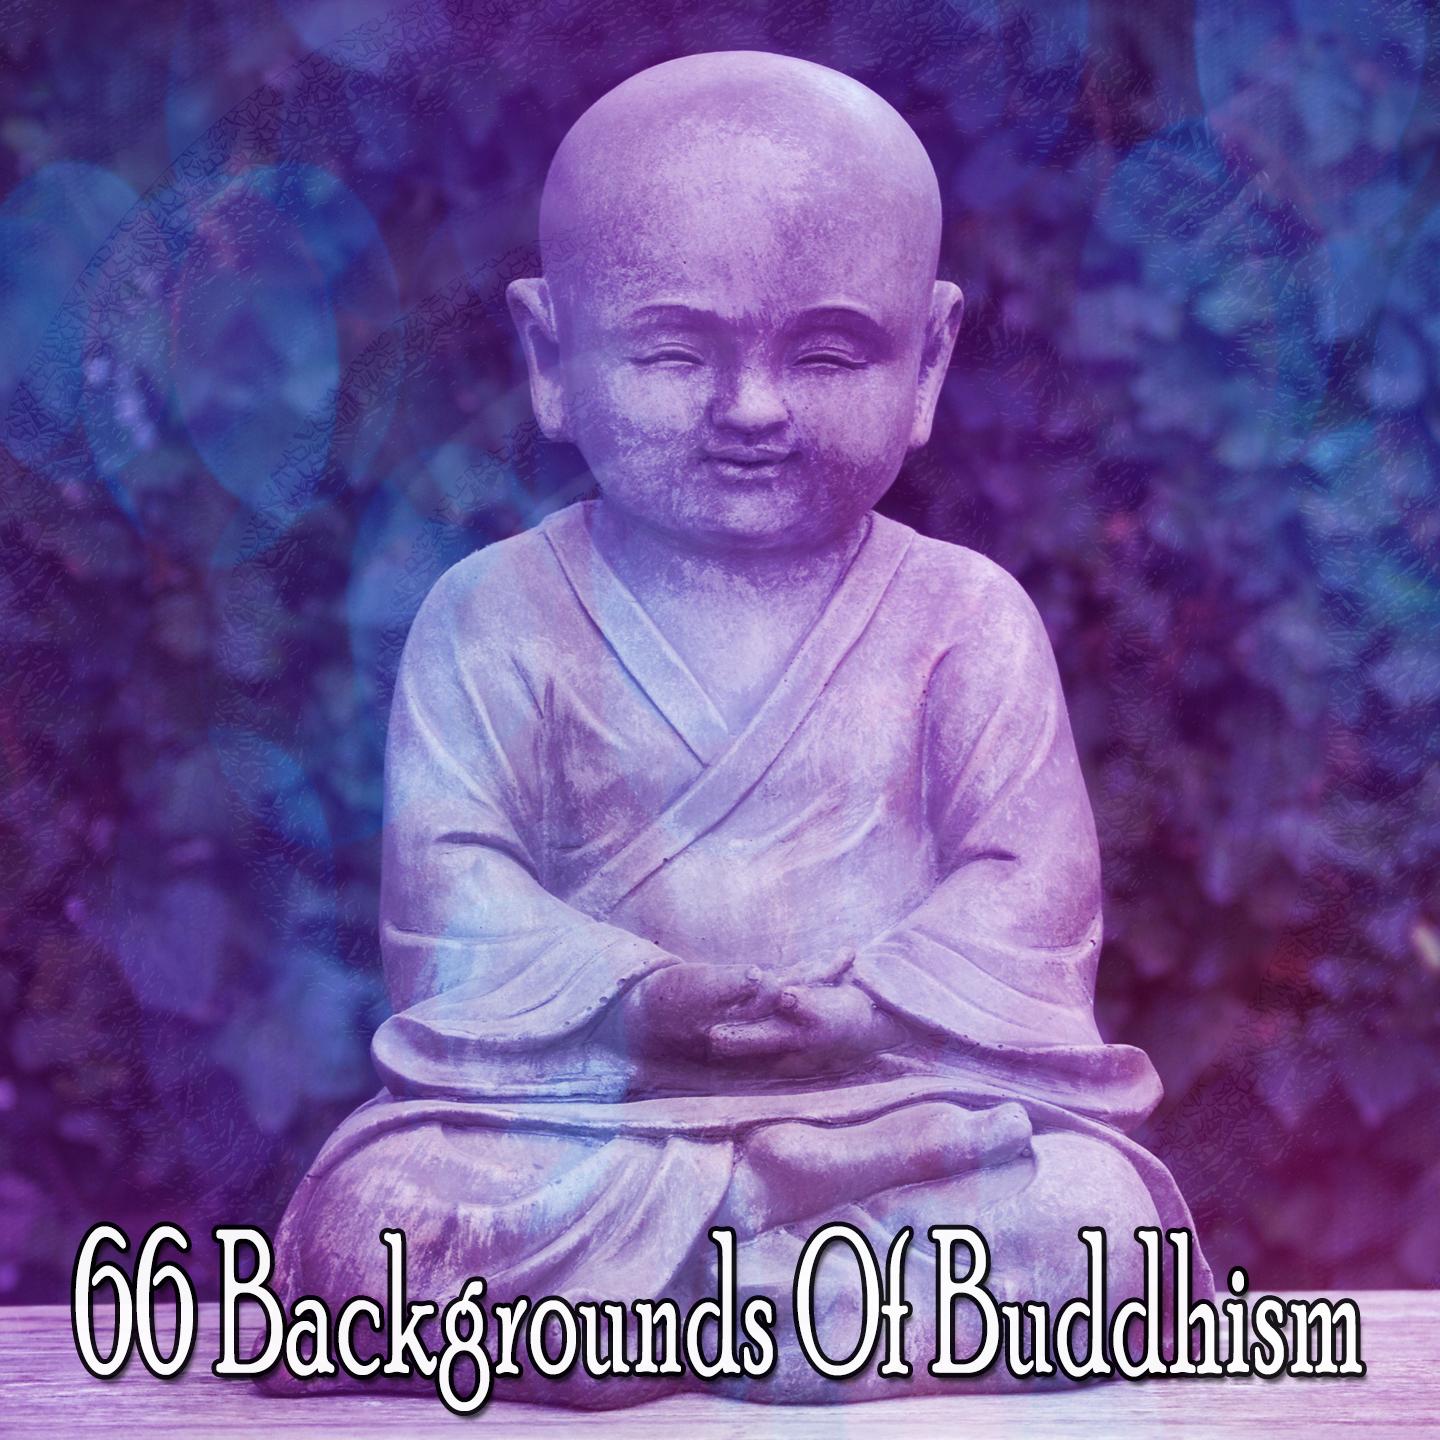 66 Backgrounds of Buddhism